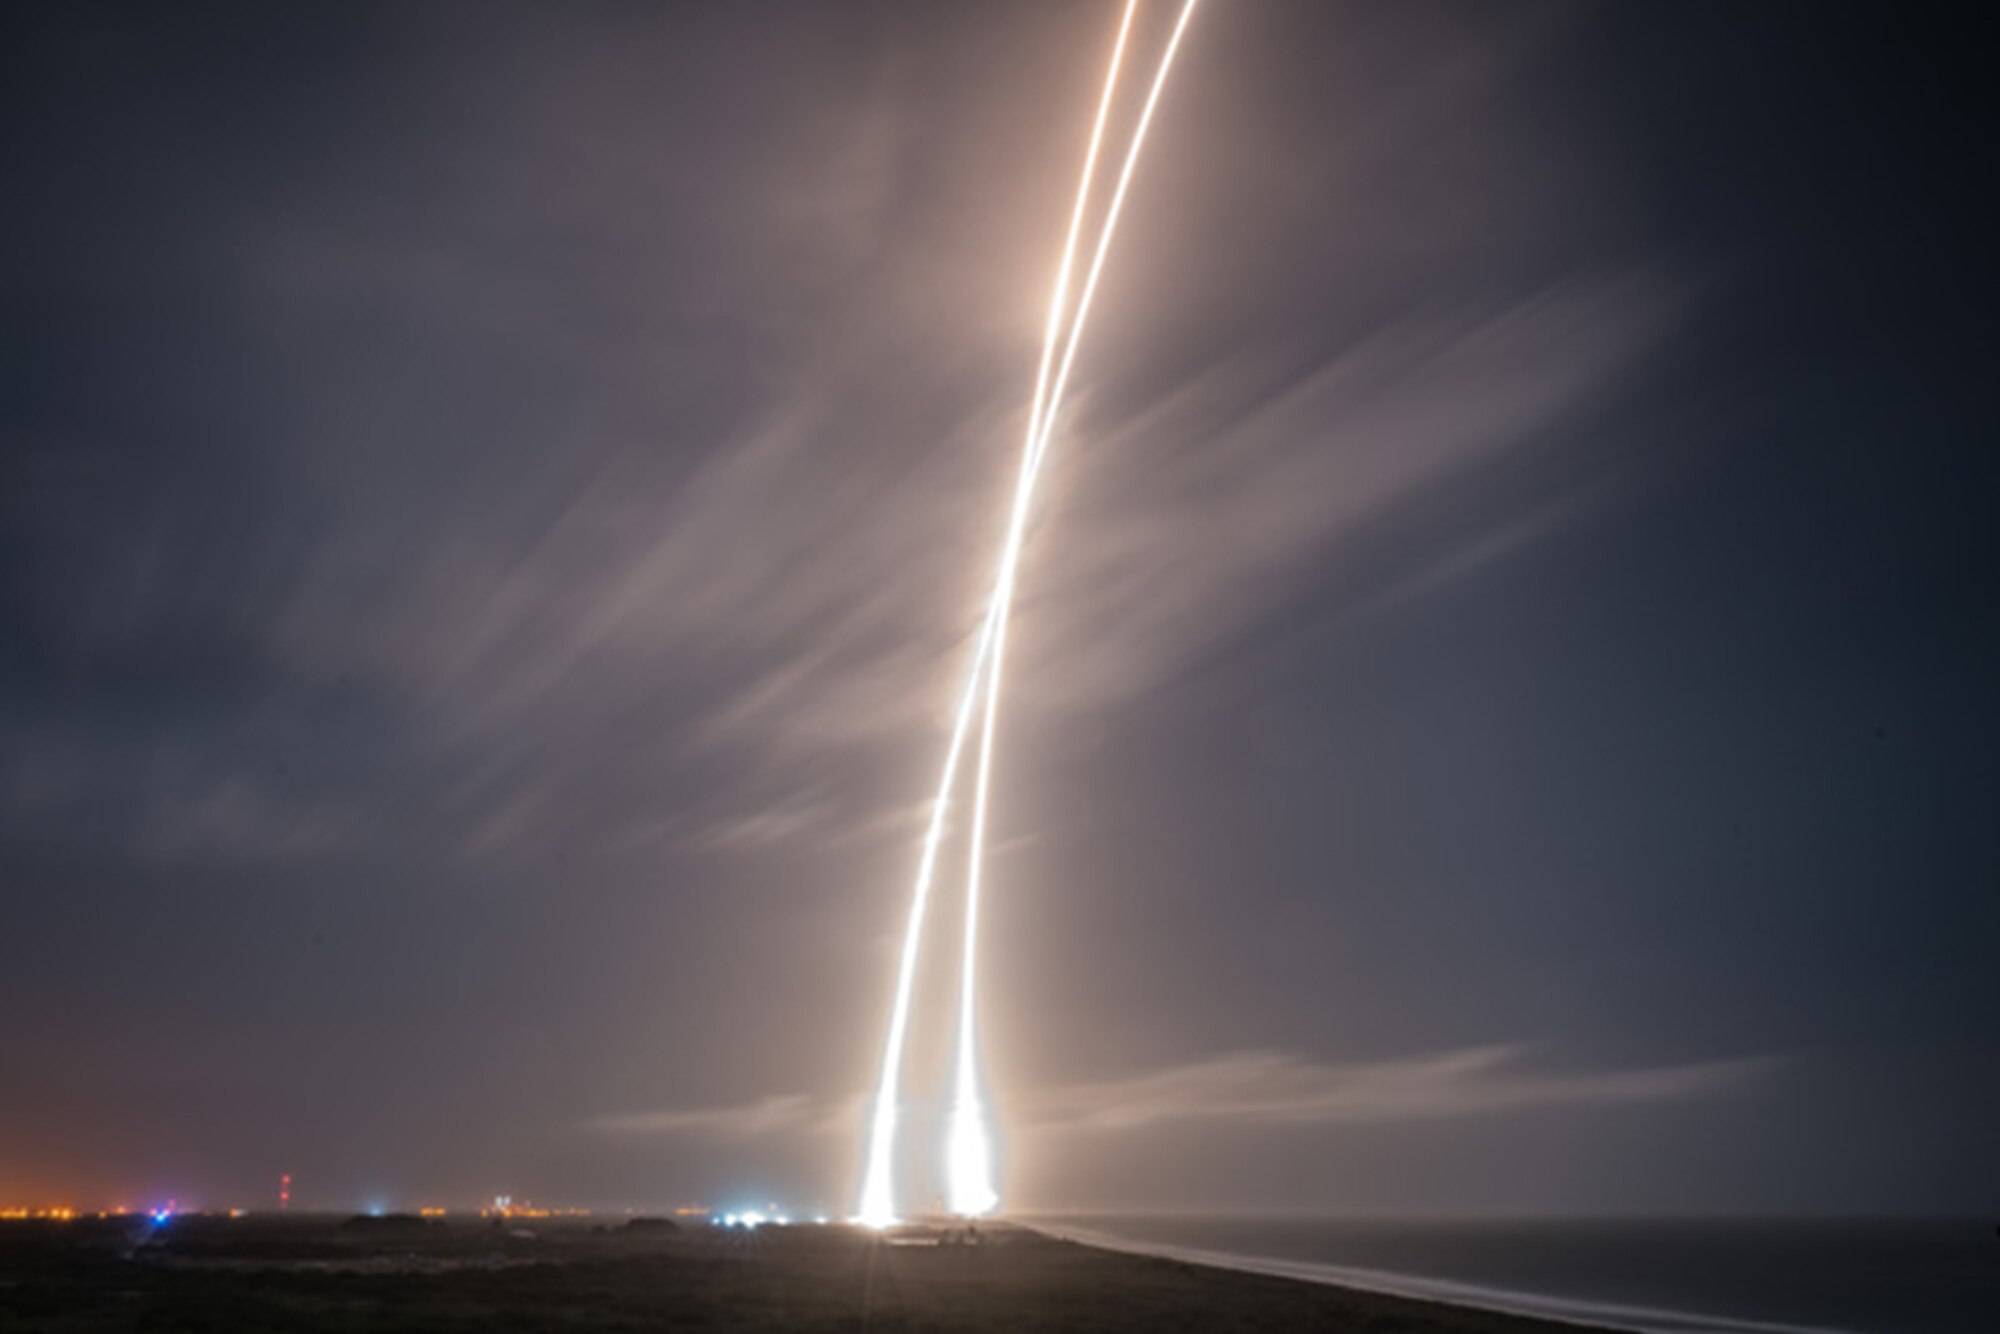 The twin streaks of light represent a time lapse photo showing both the launch and landing of a SpaceX Falcon 9 rocket, which completed the round trip from Earth to space (where the rocket placed 11 satellites in orbit) and back in roughly 10 minutes. The Falcon blasted off from Launch Complex 40 at nearby Cape Canaveral Air Force Station, then executed a perfect vertical landing and the former Launch Complex 13 -- now Landing Zone 1 -- a little more than five miles south from where it took off. It marked the first time a rocket delivered spacecraft into orbit and returned safely to Earth. SpaceX hopes to reuse their rockets, greatly reducing the cost of their space program. The reservists of the 920th Rescue Wing provide range clearance and safety contingency support for all rocket launches from CCAFS/Kennedy Space Center. (courtesy photo/SpaceX)